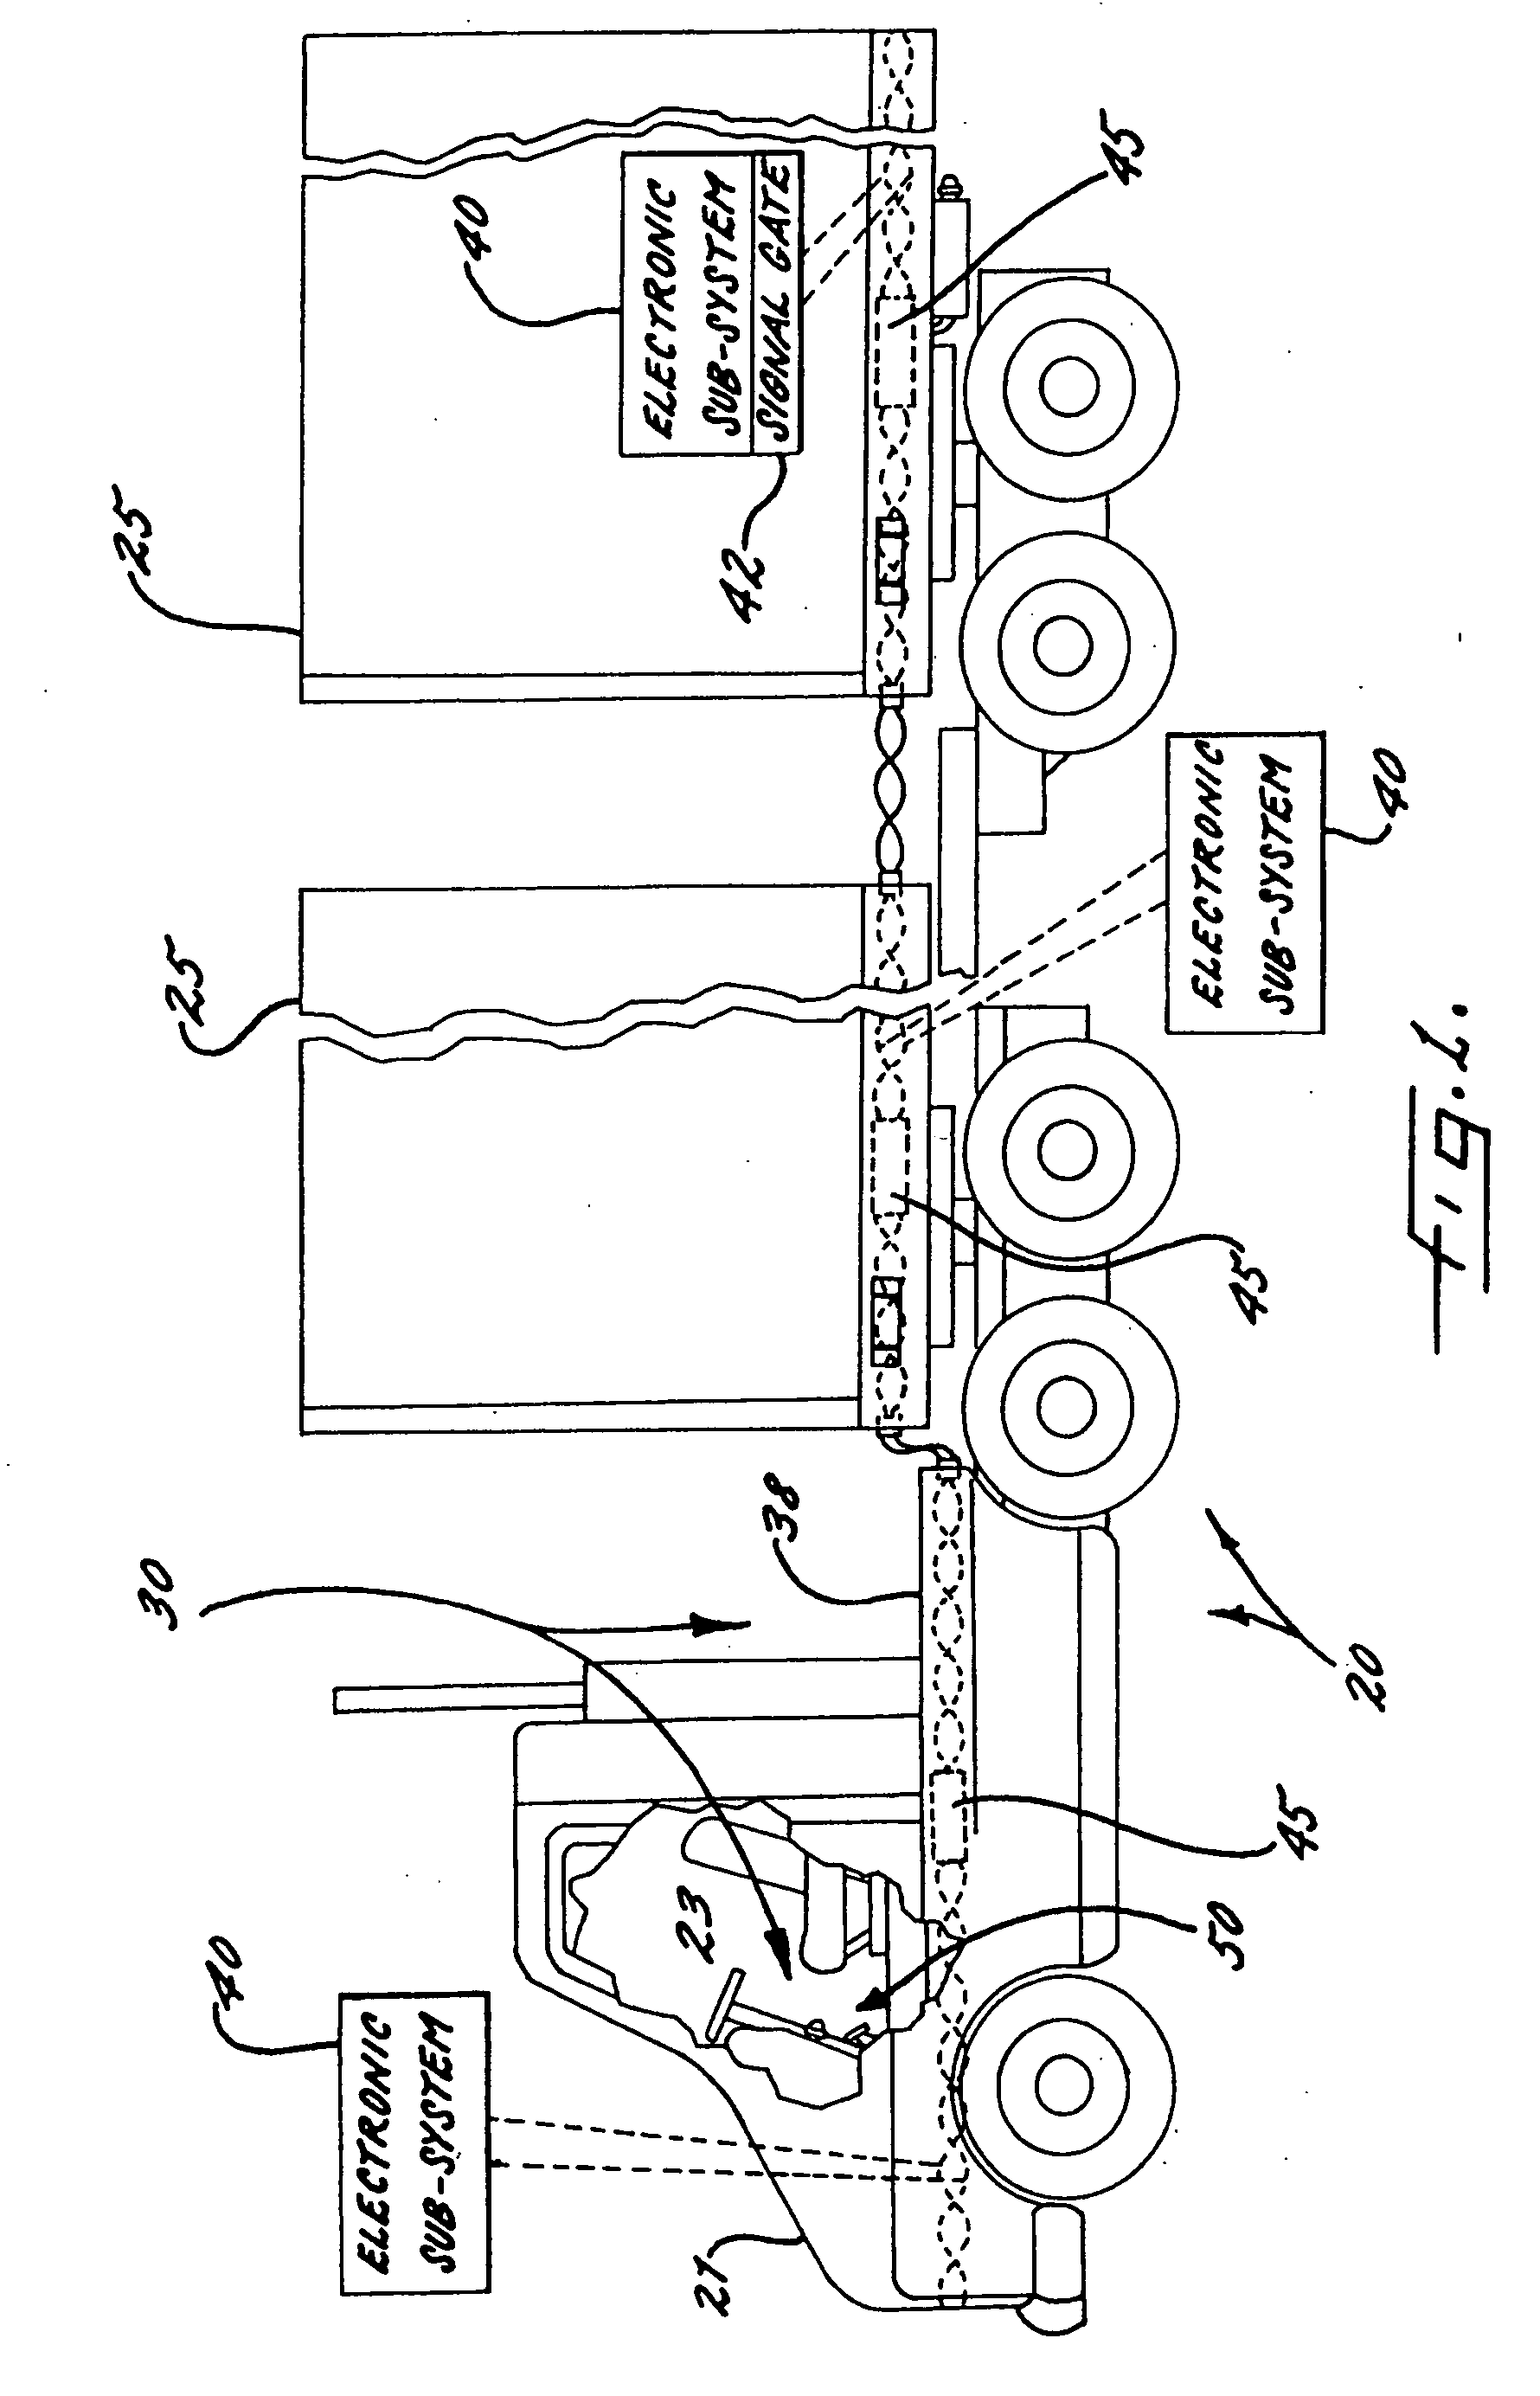 System, apparatus and methods for data communication between vehicle and remote data communication terminal, between portions of vehicle and other portions of vehicle, between two or more vehicles, and between vehicle and communications network